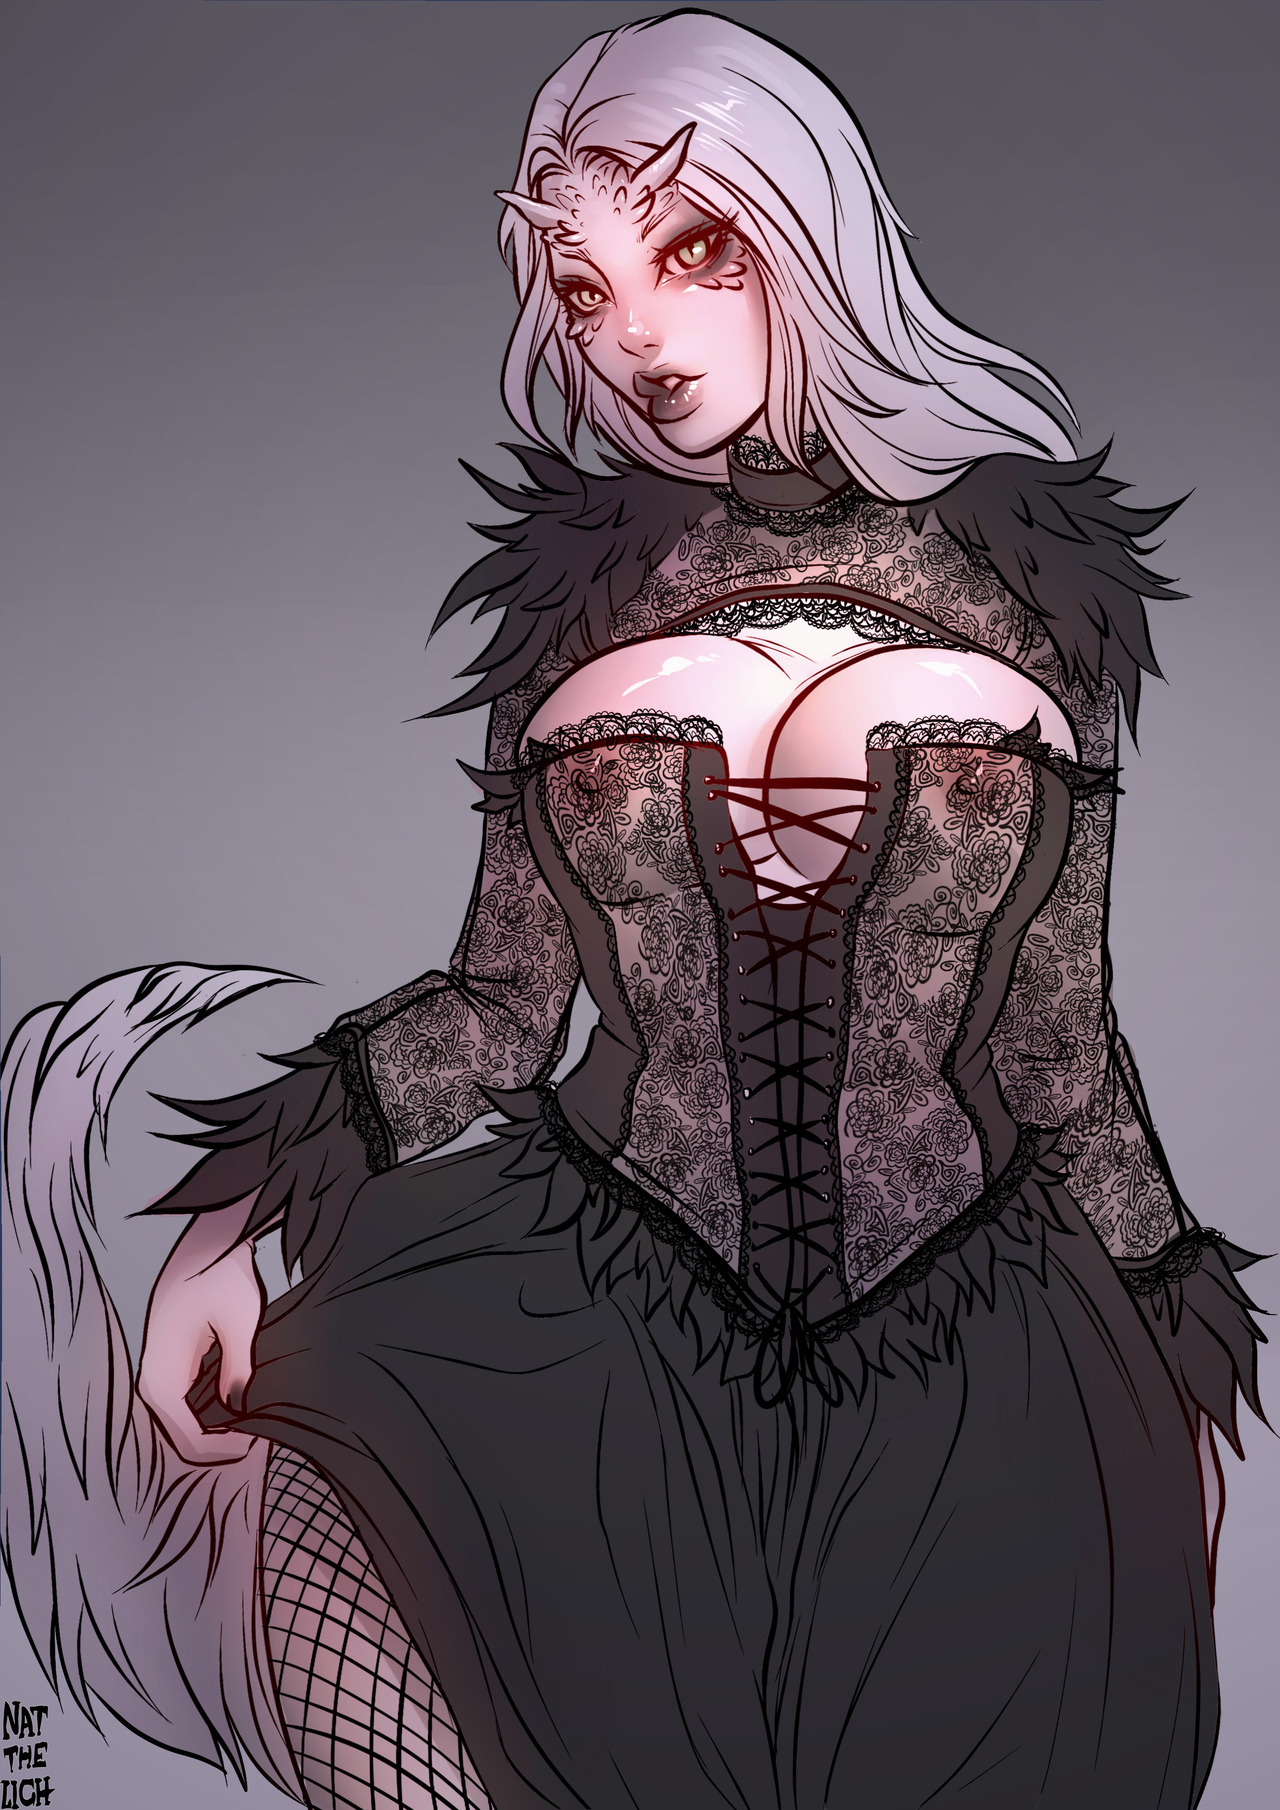 natthelich: Decided to make a doodly Goth Crossbreed Priscilla, because why not?Fluffy